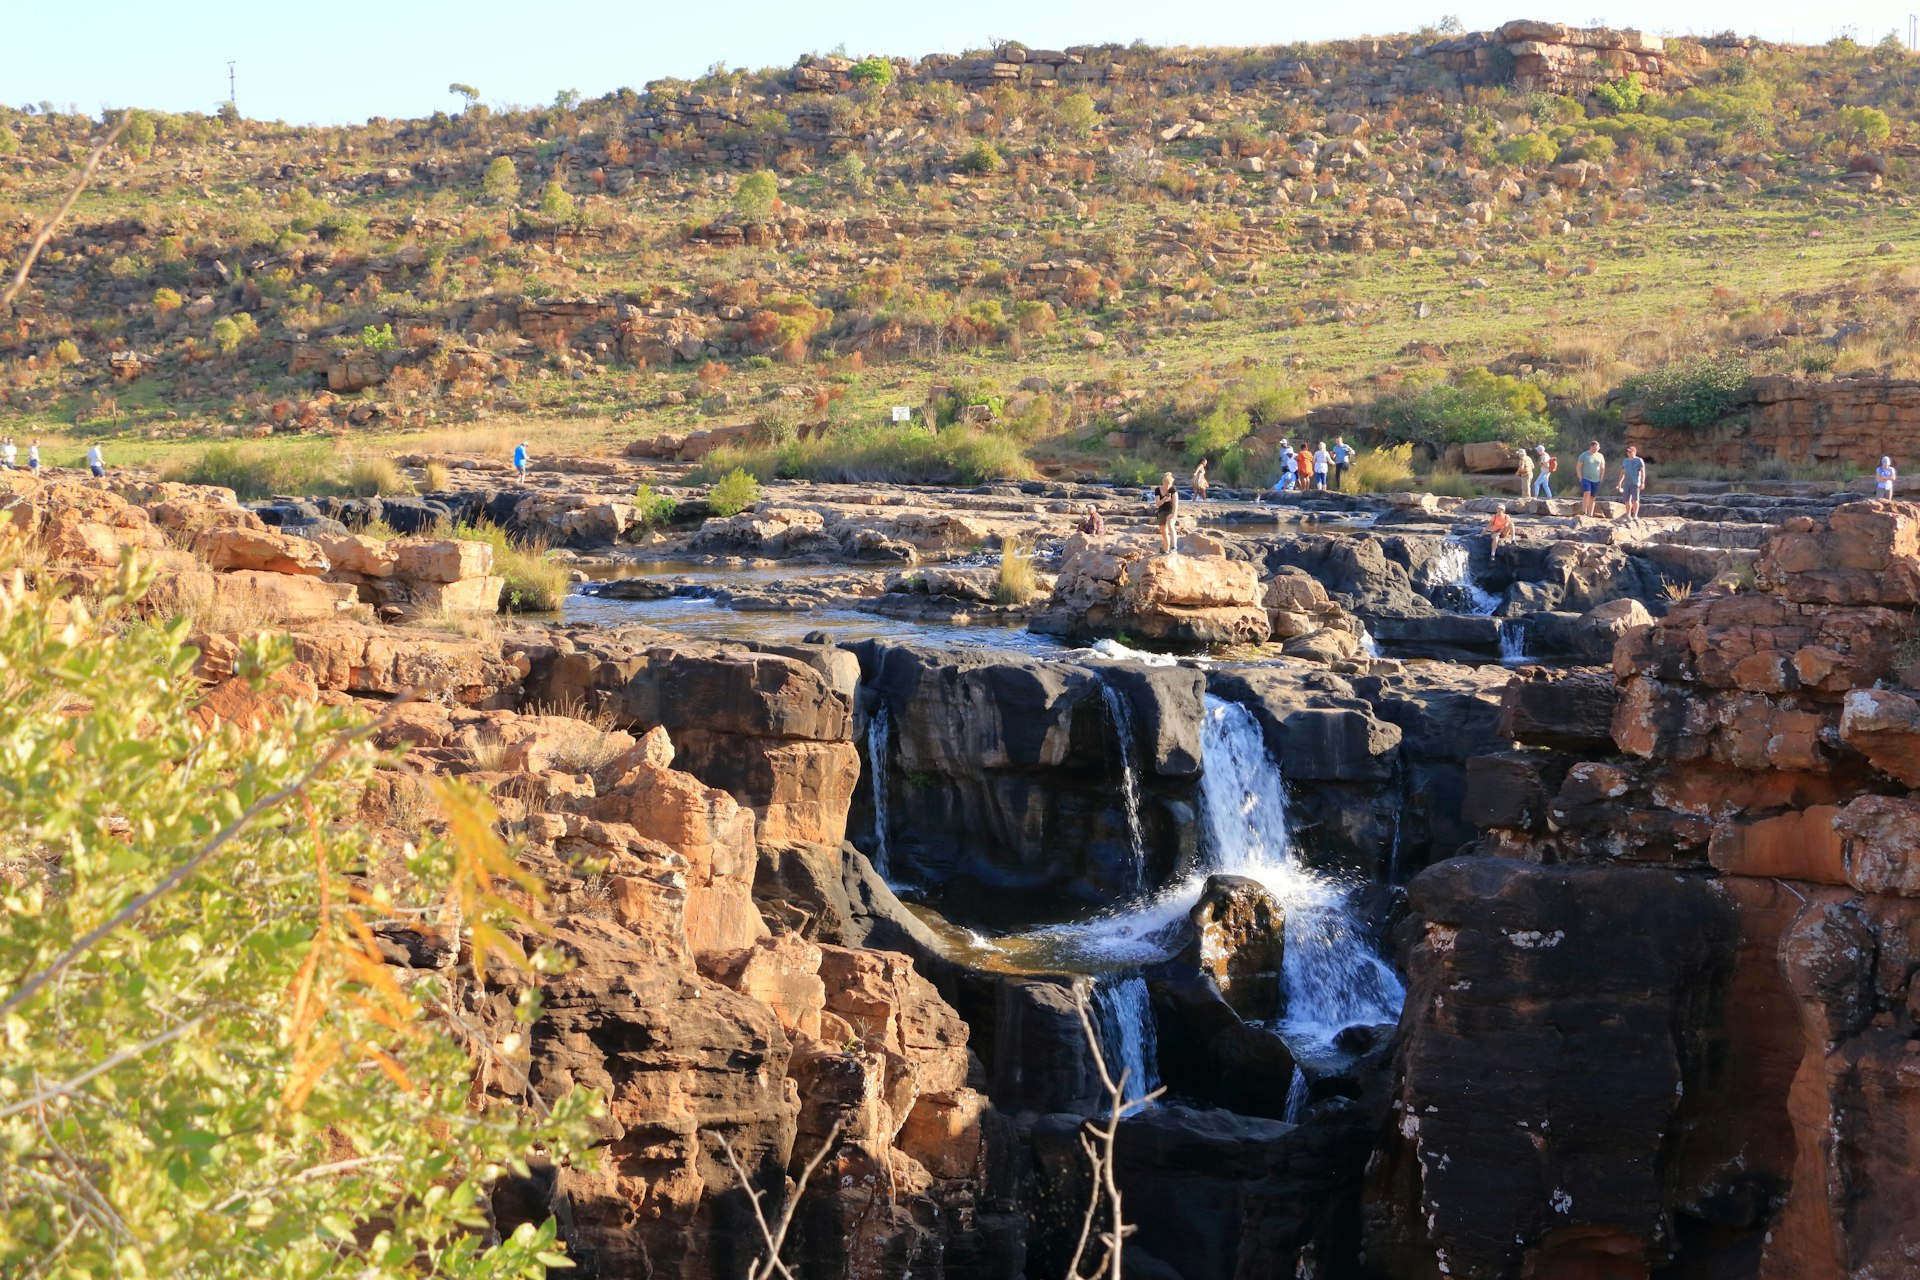 People enjoy Bourke's Luck Potholes, geological formation in the Blyde River Canyon area 